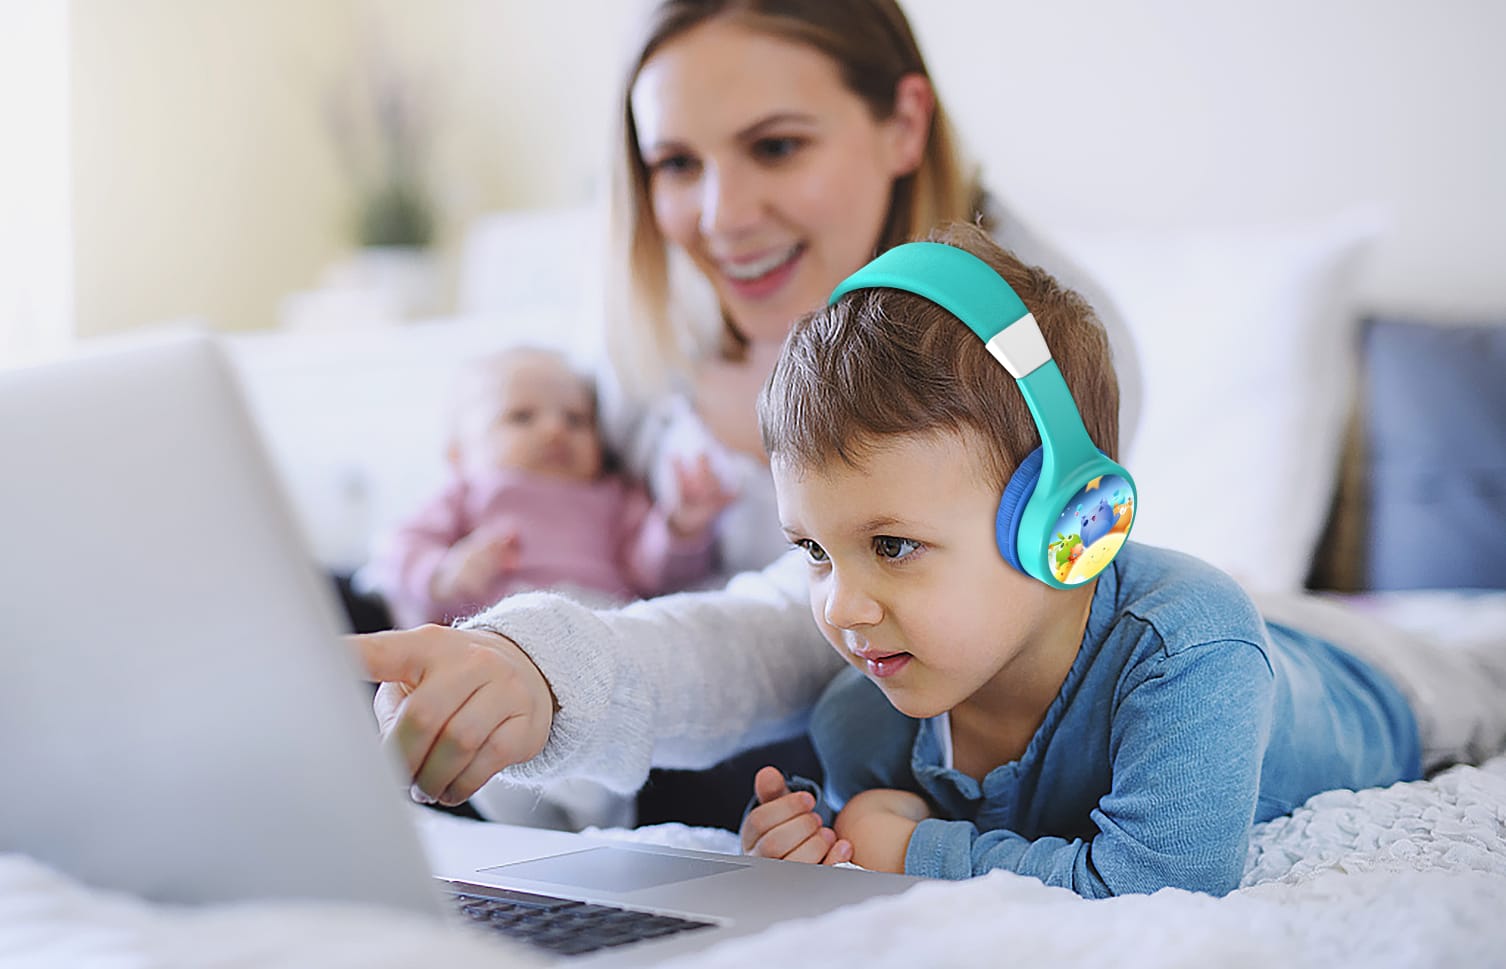 e-PitchPerfect (e-PP) 67M Kids Wireless Headphones with Microphone On-Ear Comfortable 90° swiveling Protein Earpads Designed and Engineered in the USA Sold 5,000+ worldwide